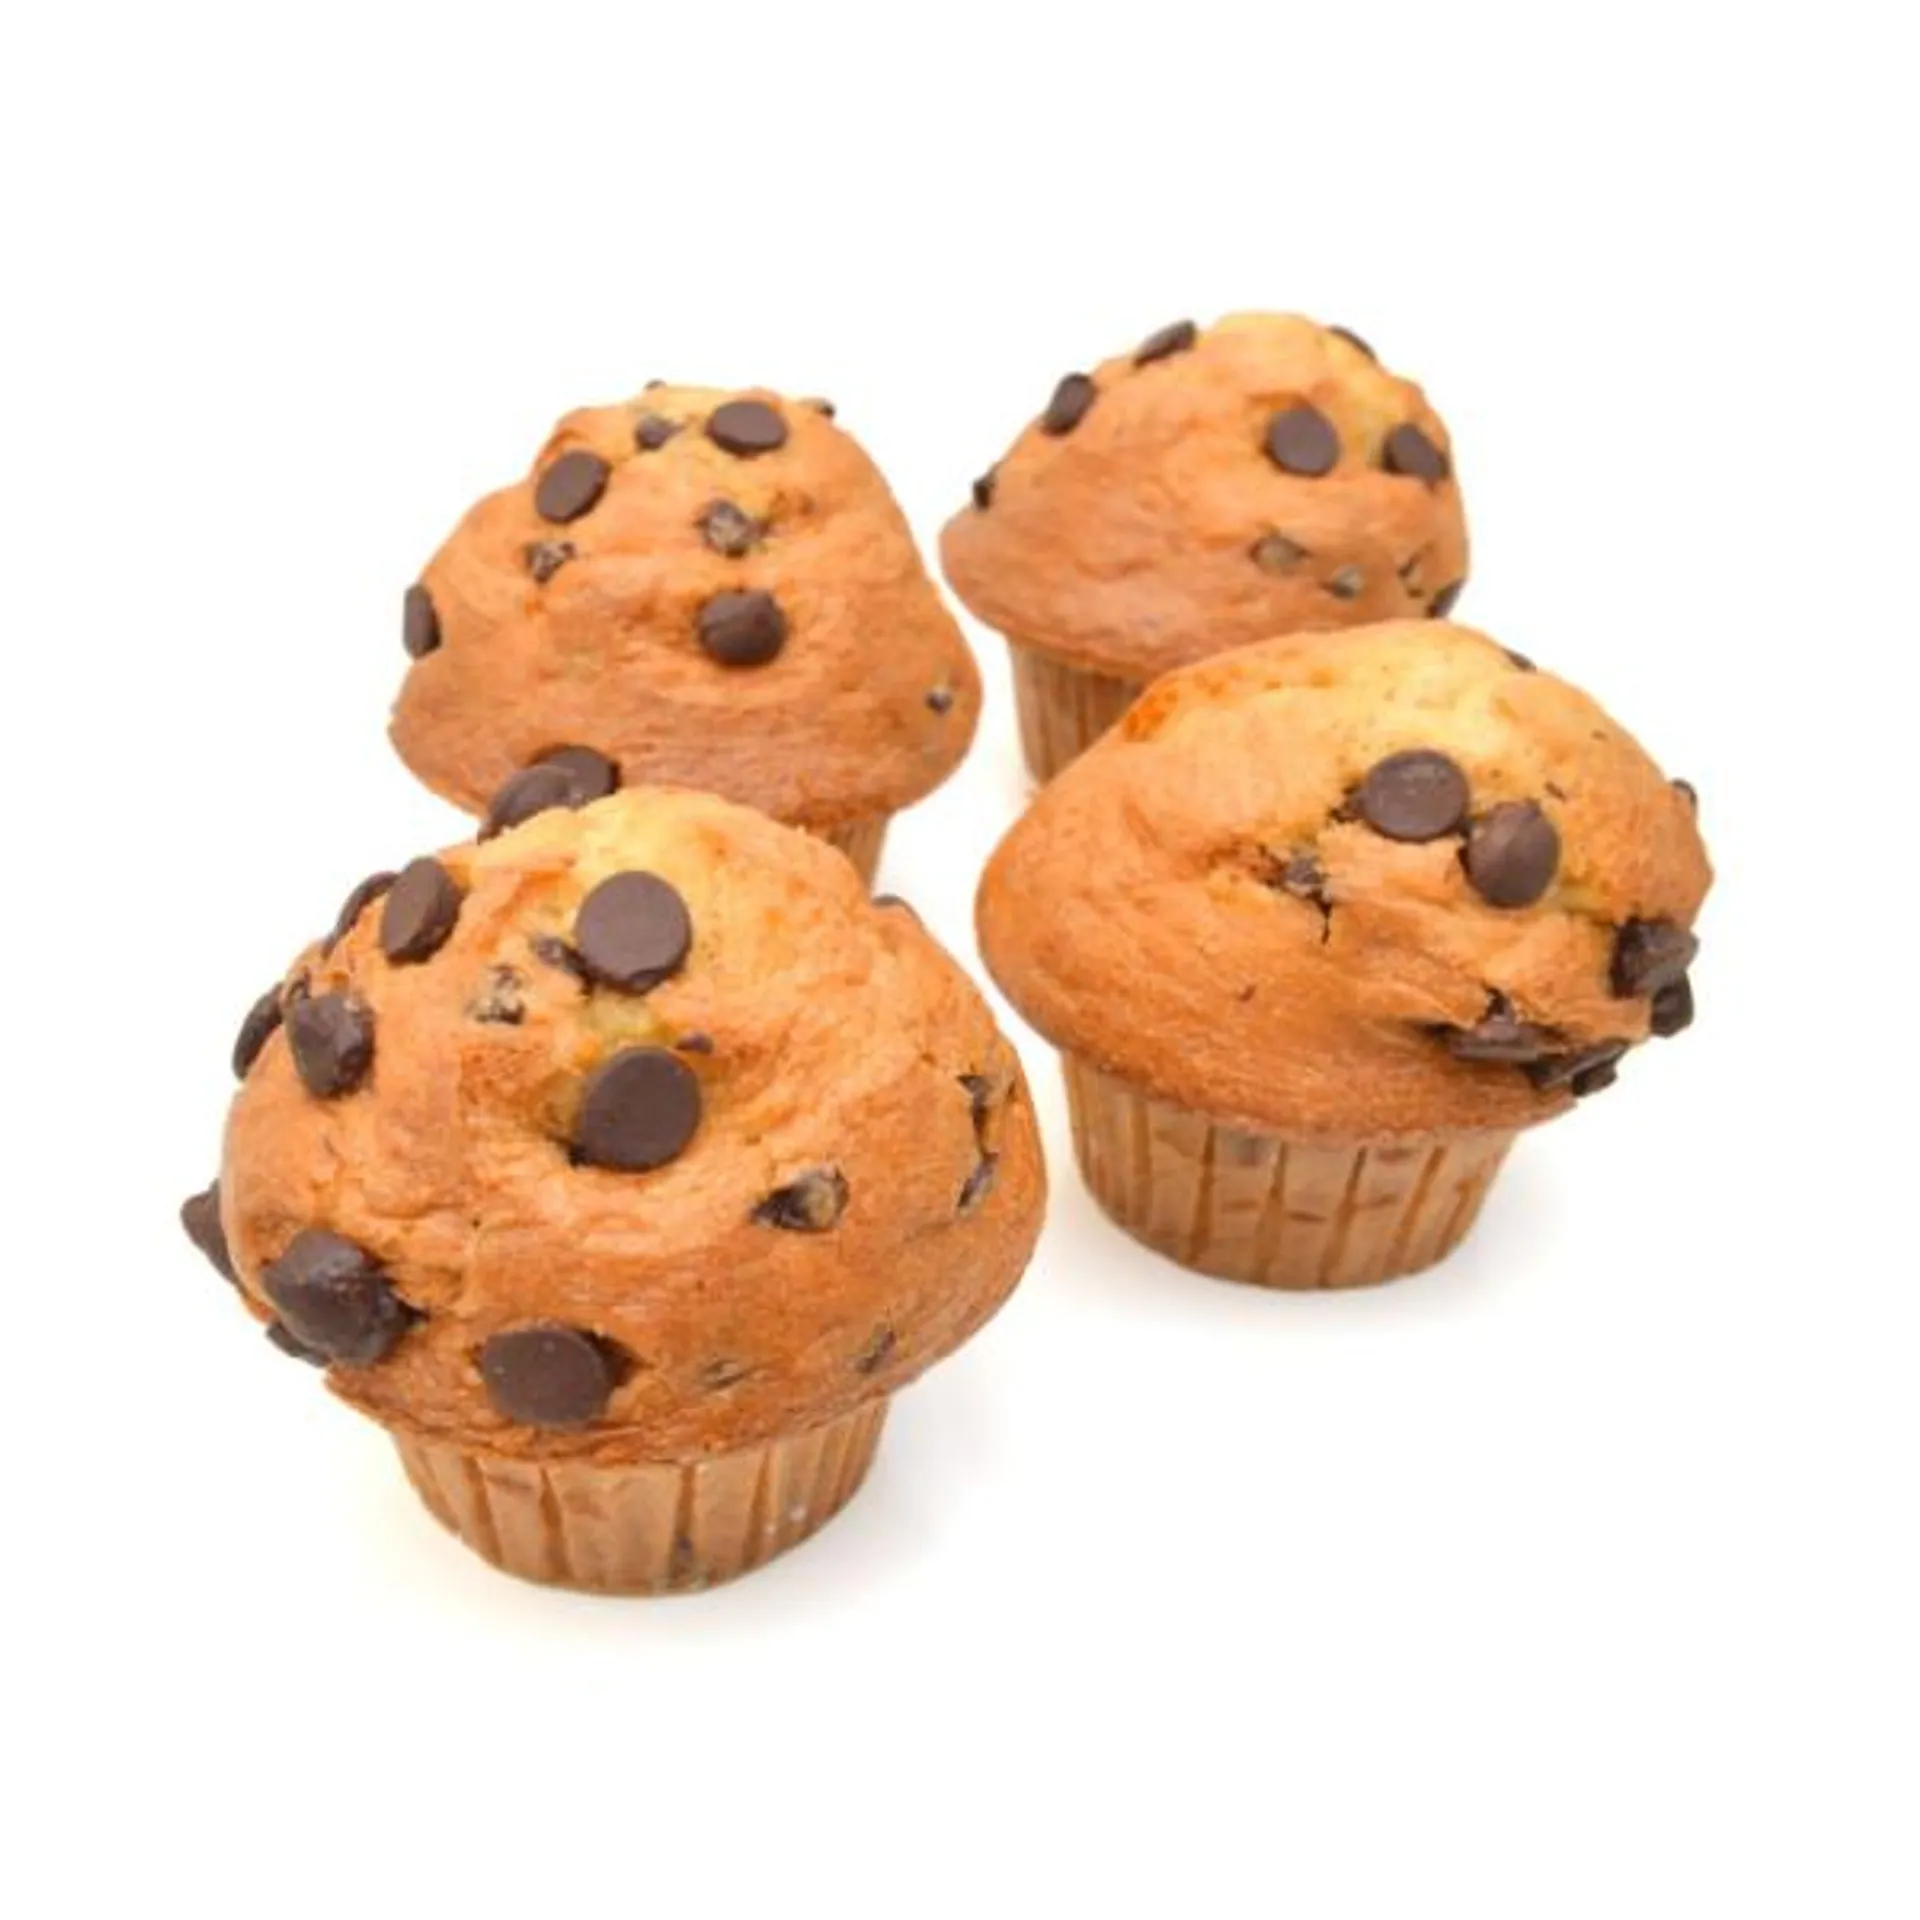 Chocolate Chip Muffins 4ct - 12 Ounce